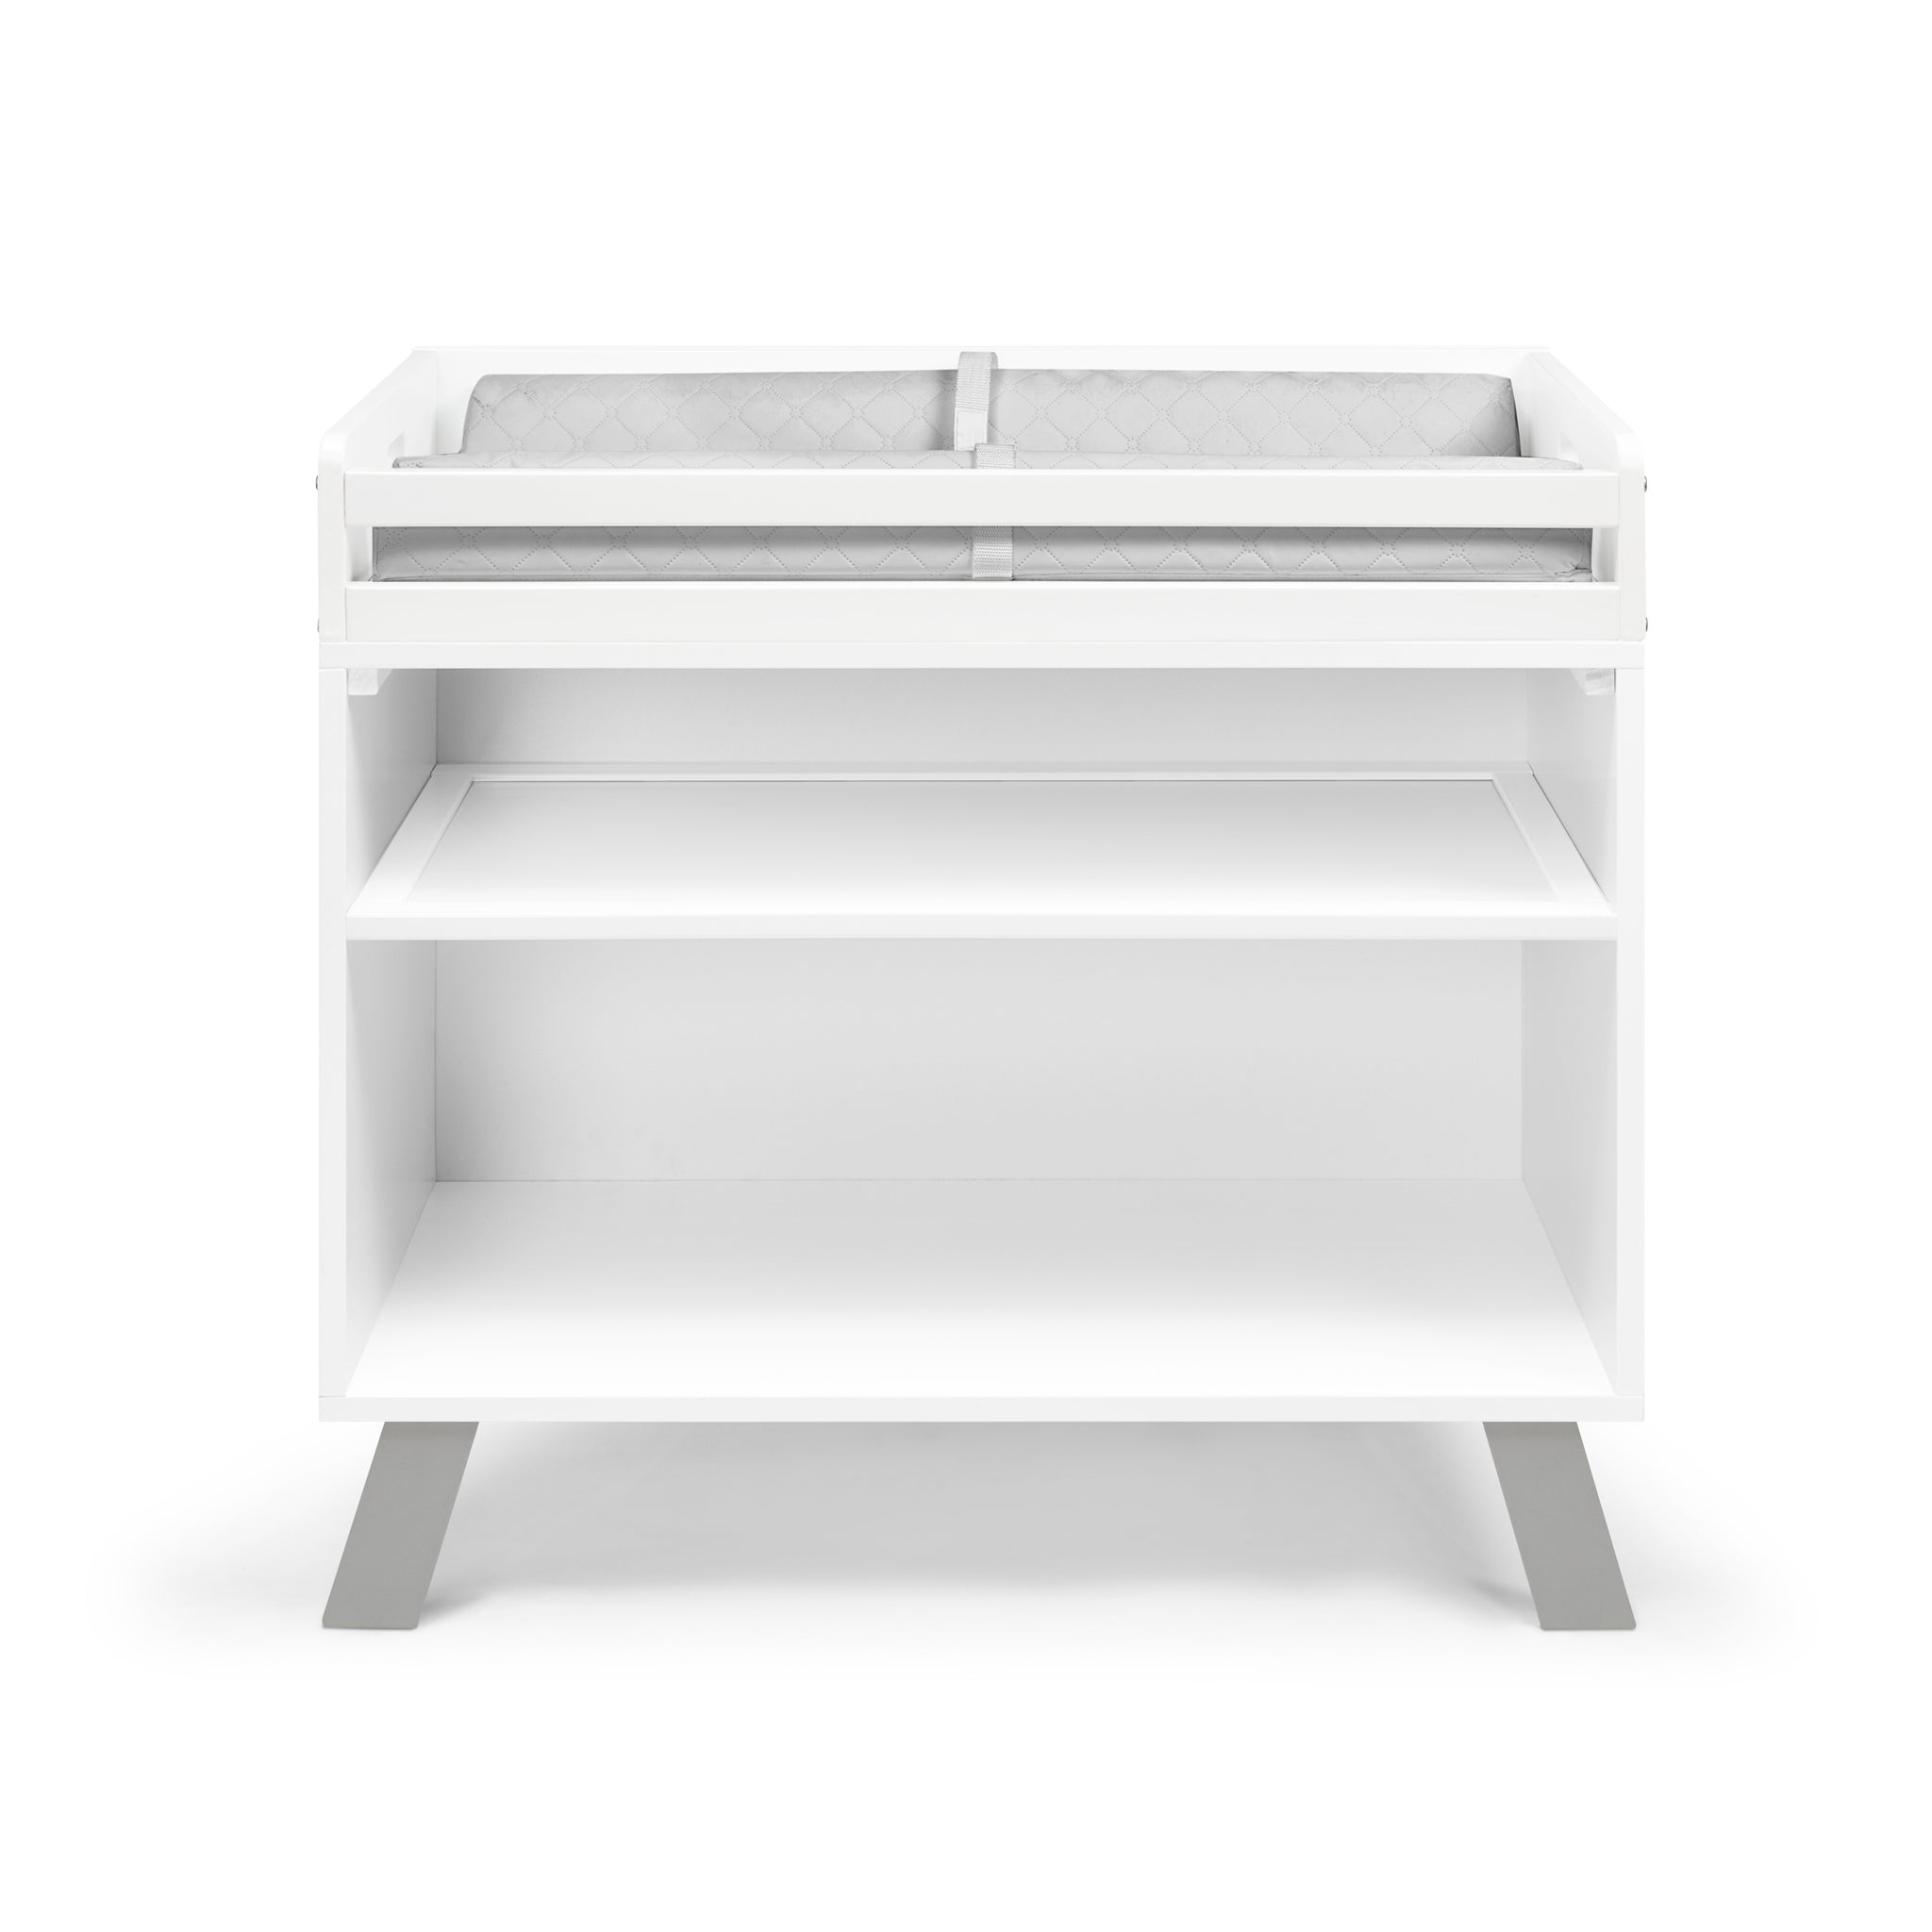 Livia Multi Purpose Changing Table White Gray white-solid wood